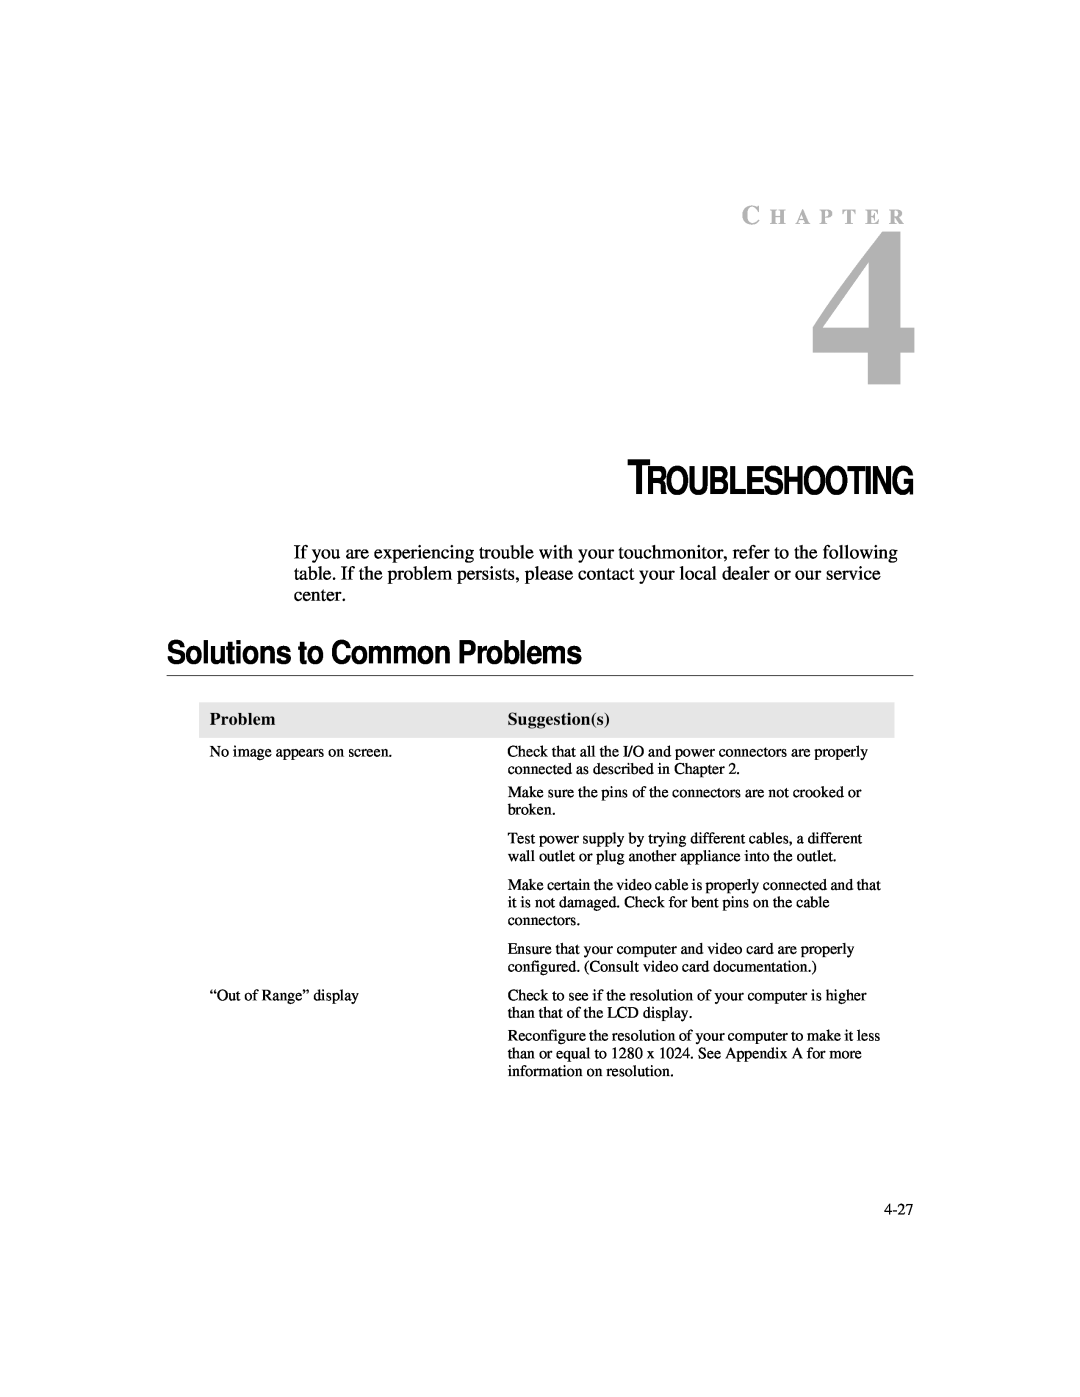 Elo TouchSystems 1925L manual Troubleshooting, Solutions to Common Problems, C H A P T E R, Suggestions 